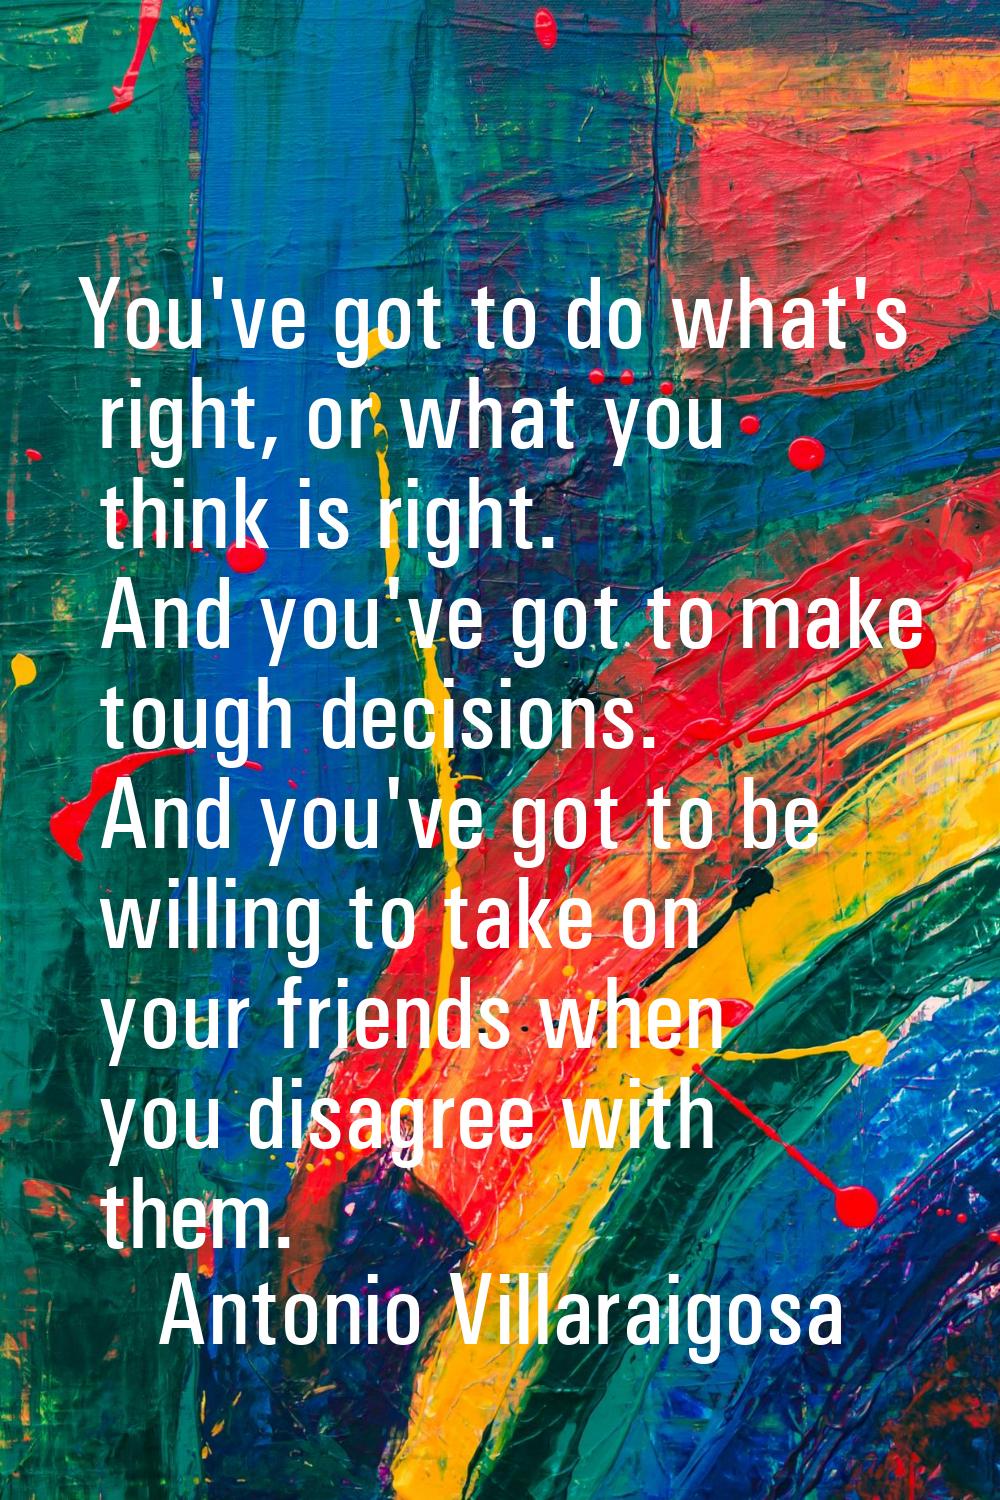 You've got to do what's right, or what you think is right. And you've got to make tough decisions. 